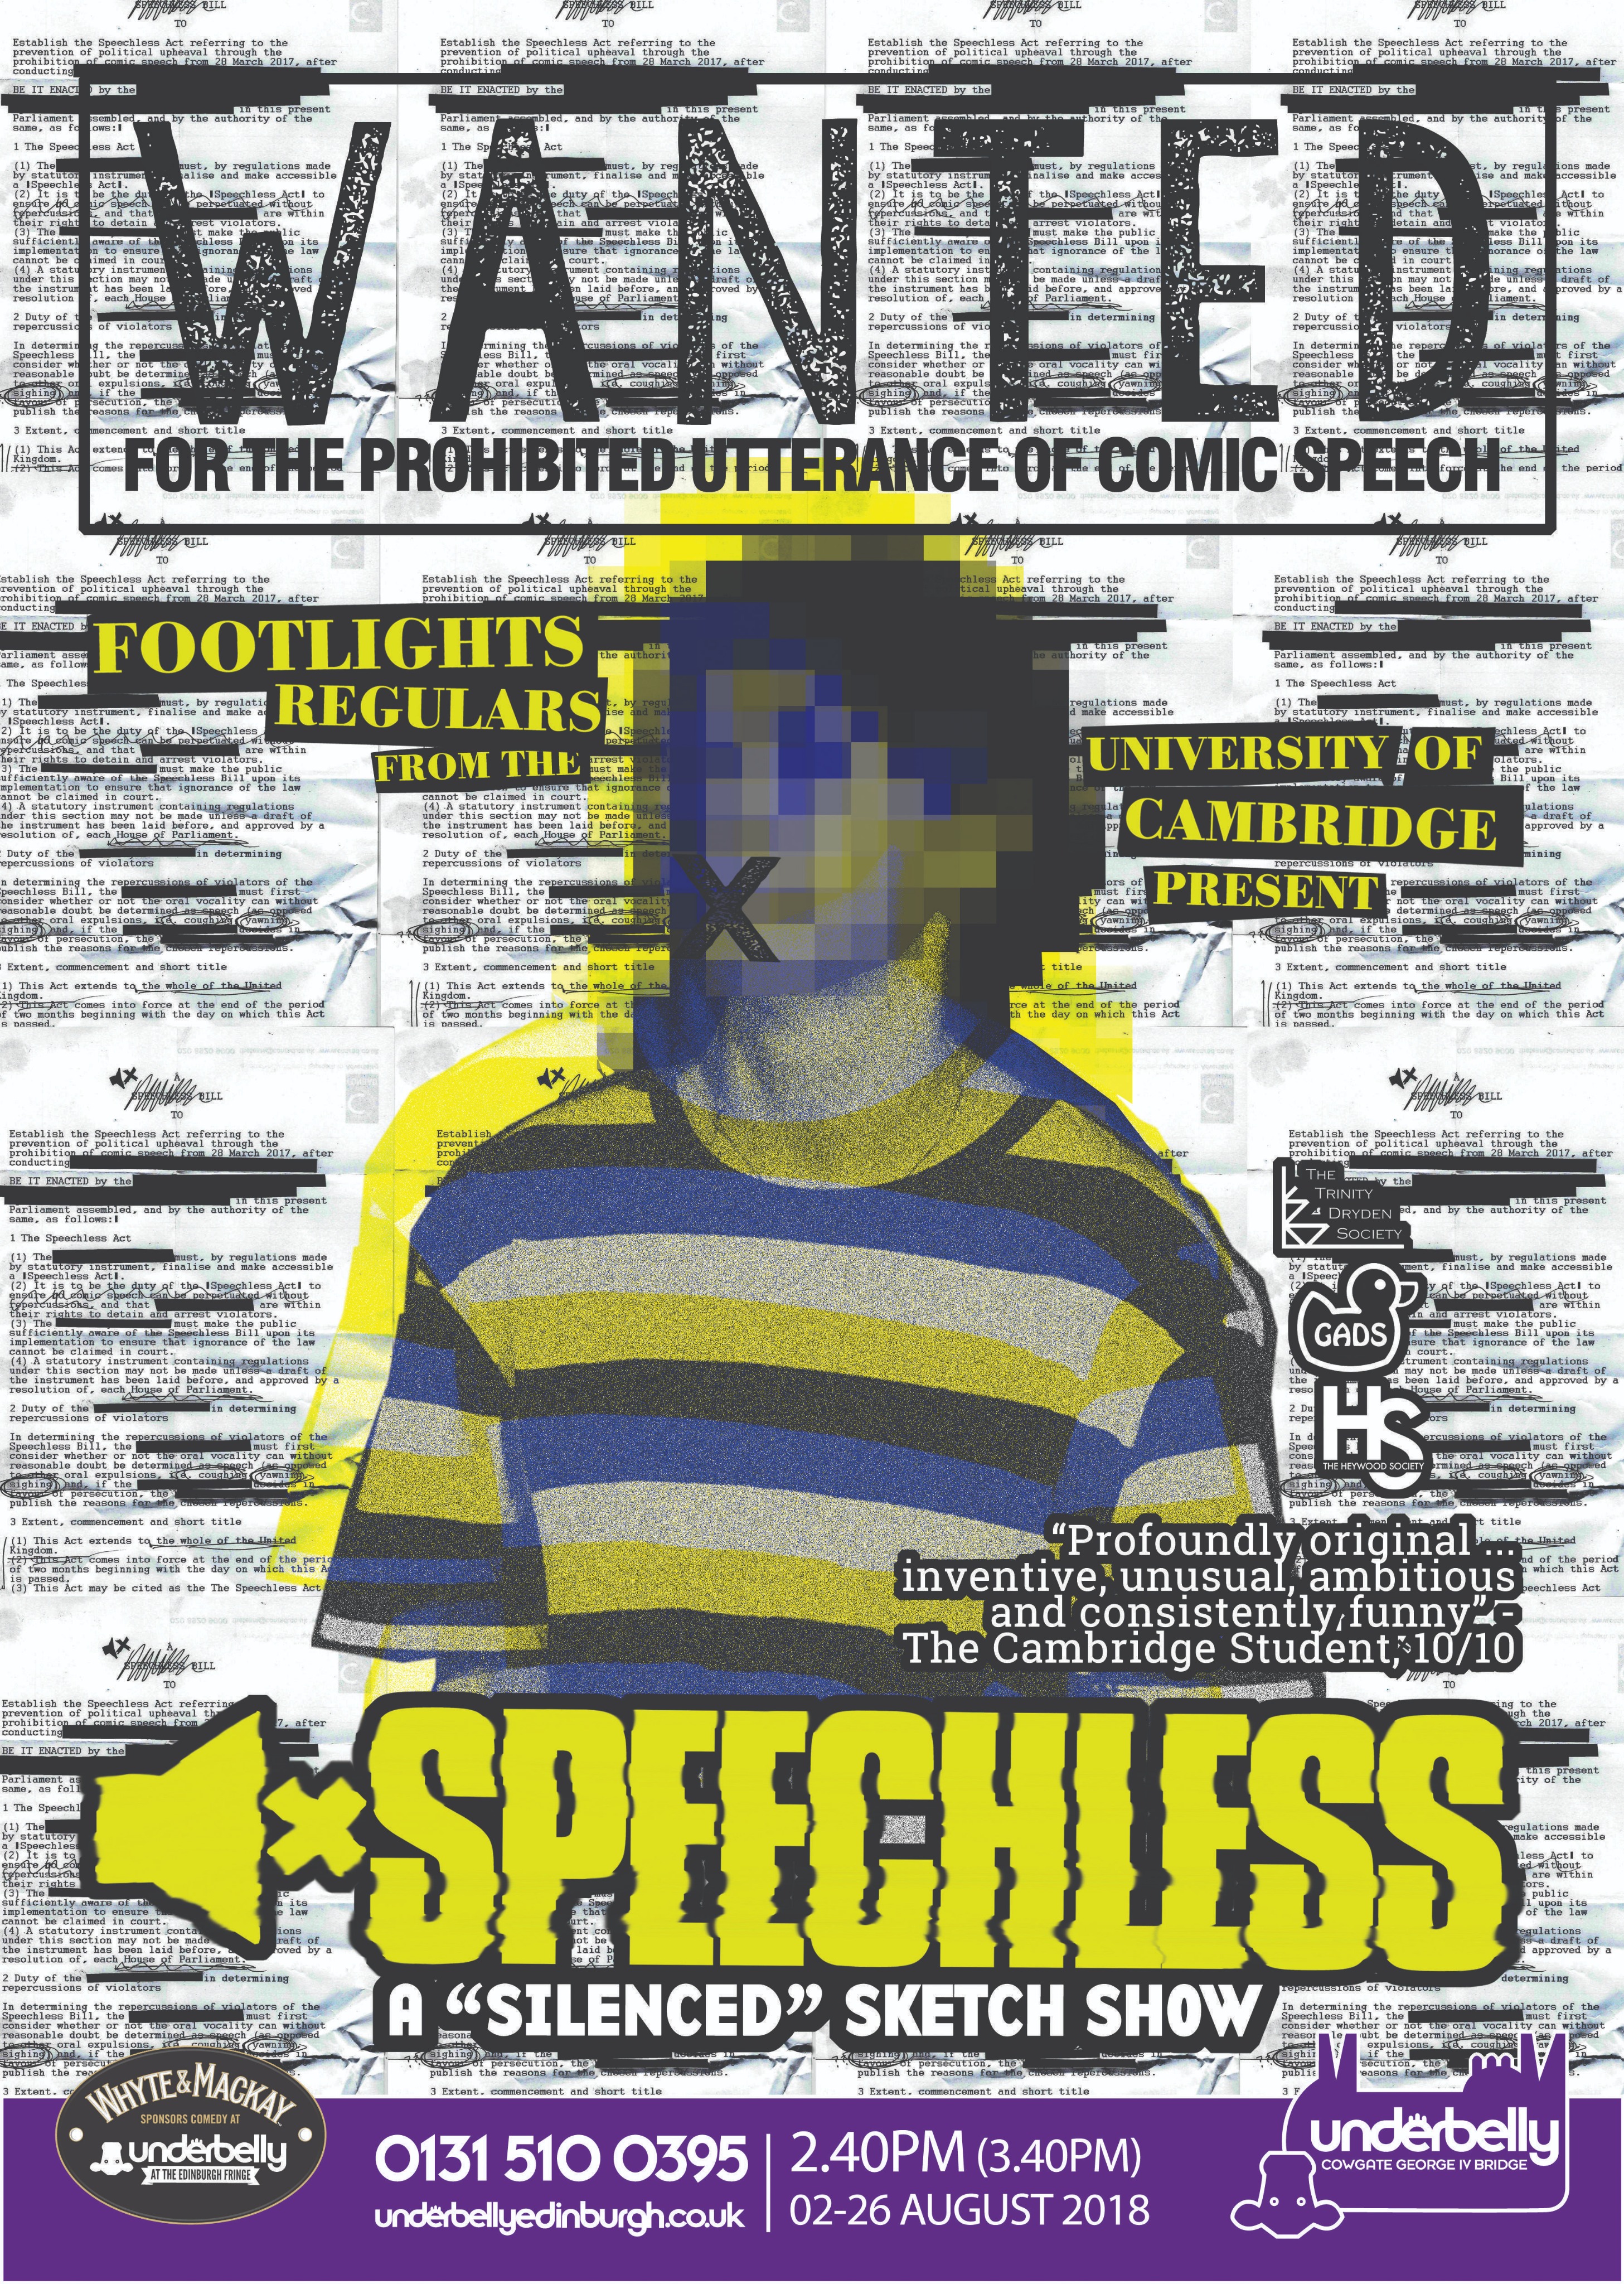 The poster for Speechless